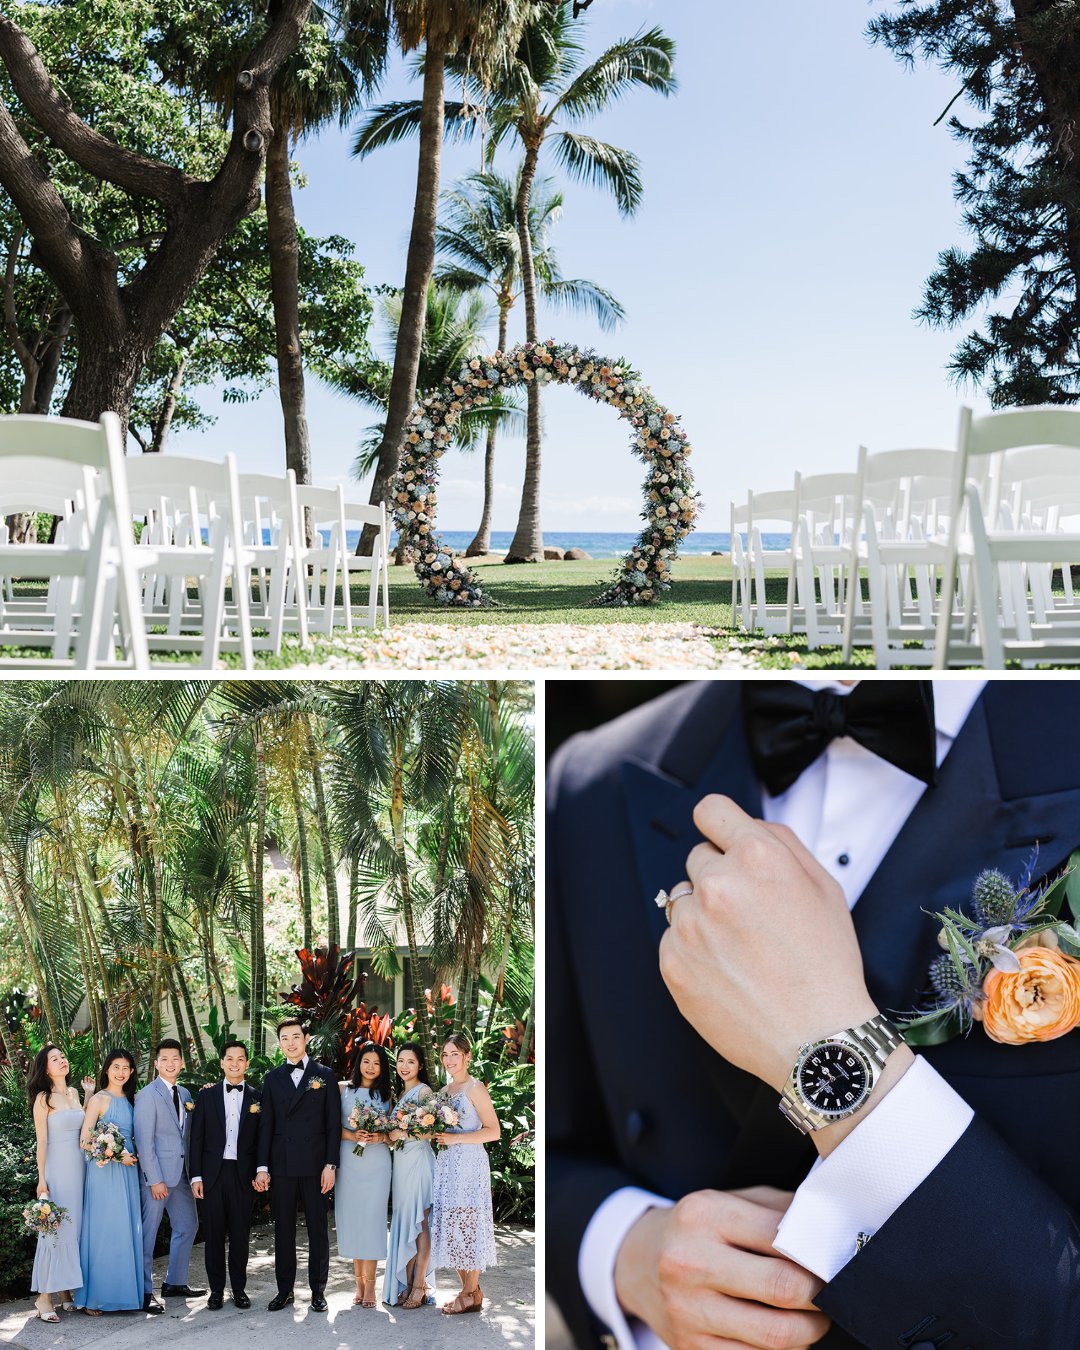 circle floral arch with ocean background, grooms with their wedding party in black and blue attire, groom wearing boutonniere and watch 